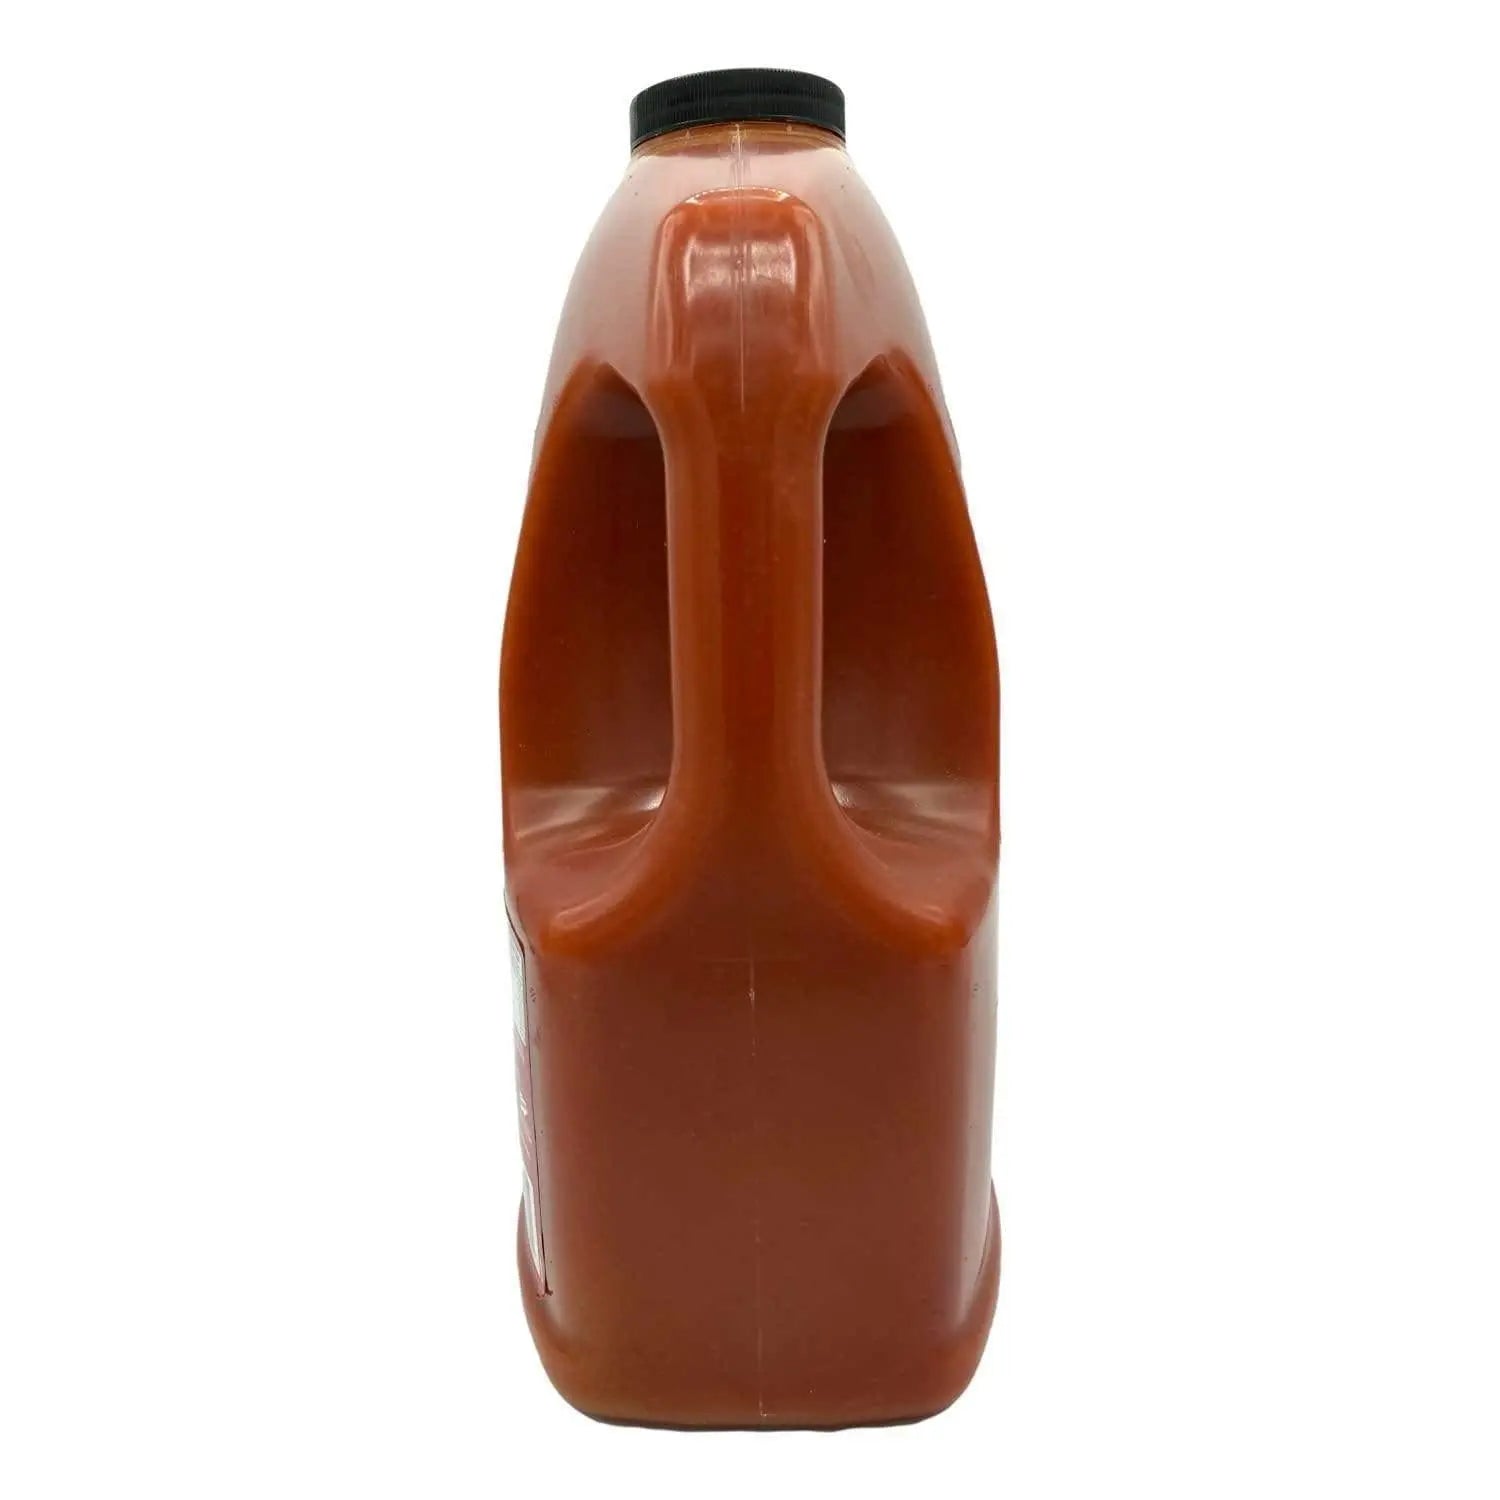 Wholesale prices with free shipping all over United States Frank's RedHot Original Cayenne Pepper Sauce (1 gal.) - Steven Deals